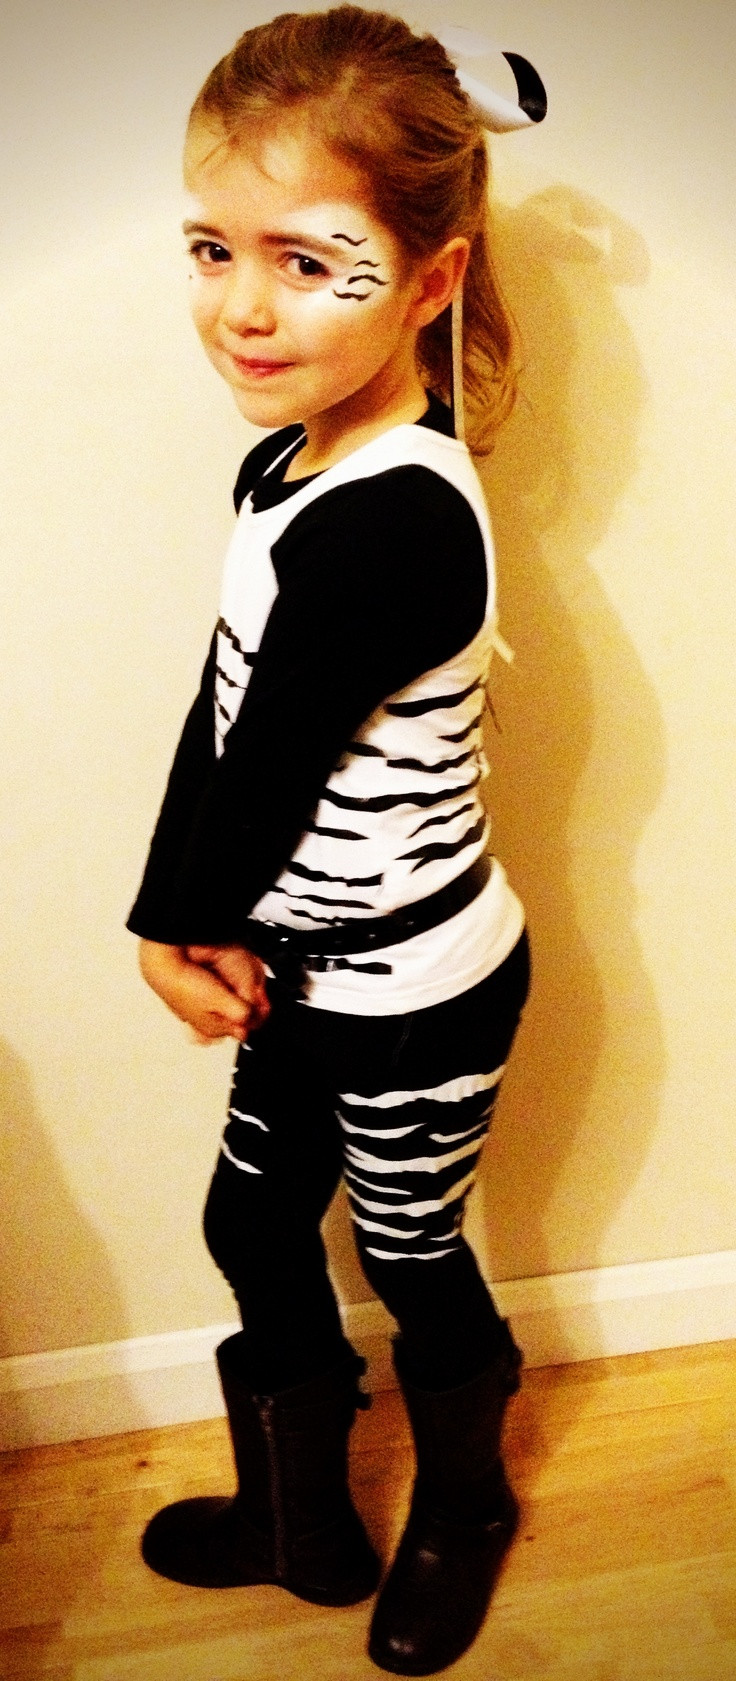 Zebra Costume DIY
 My styling Zebra such a simple costume All you need is